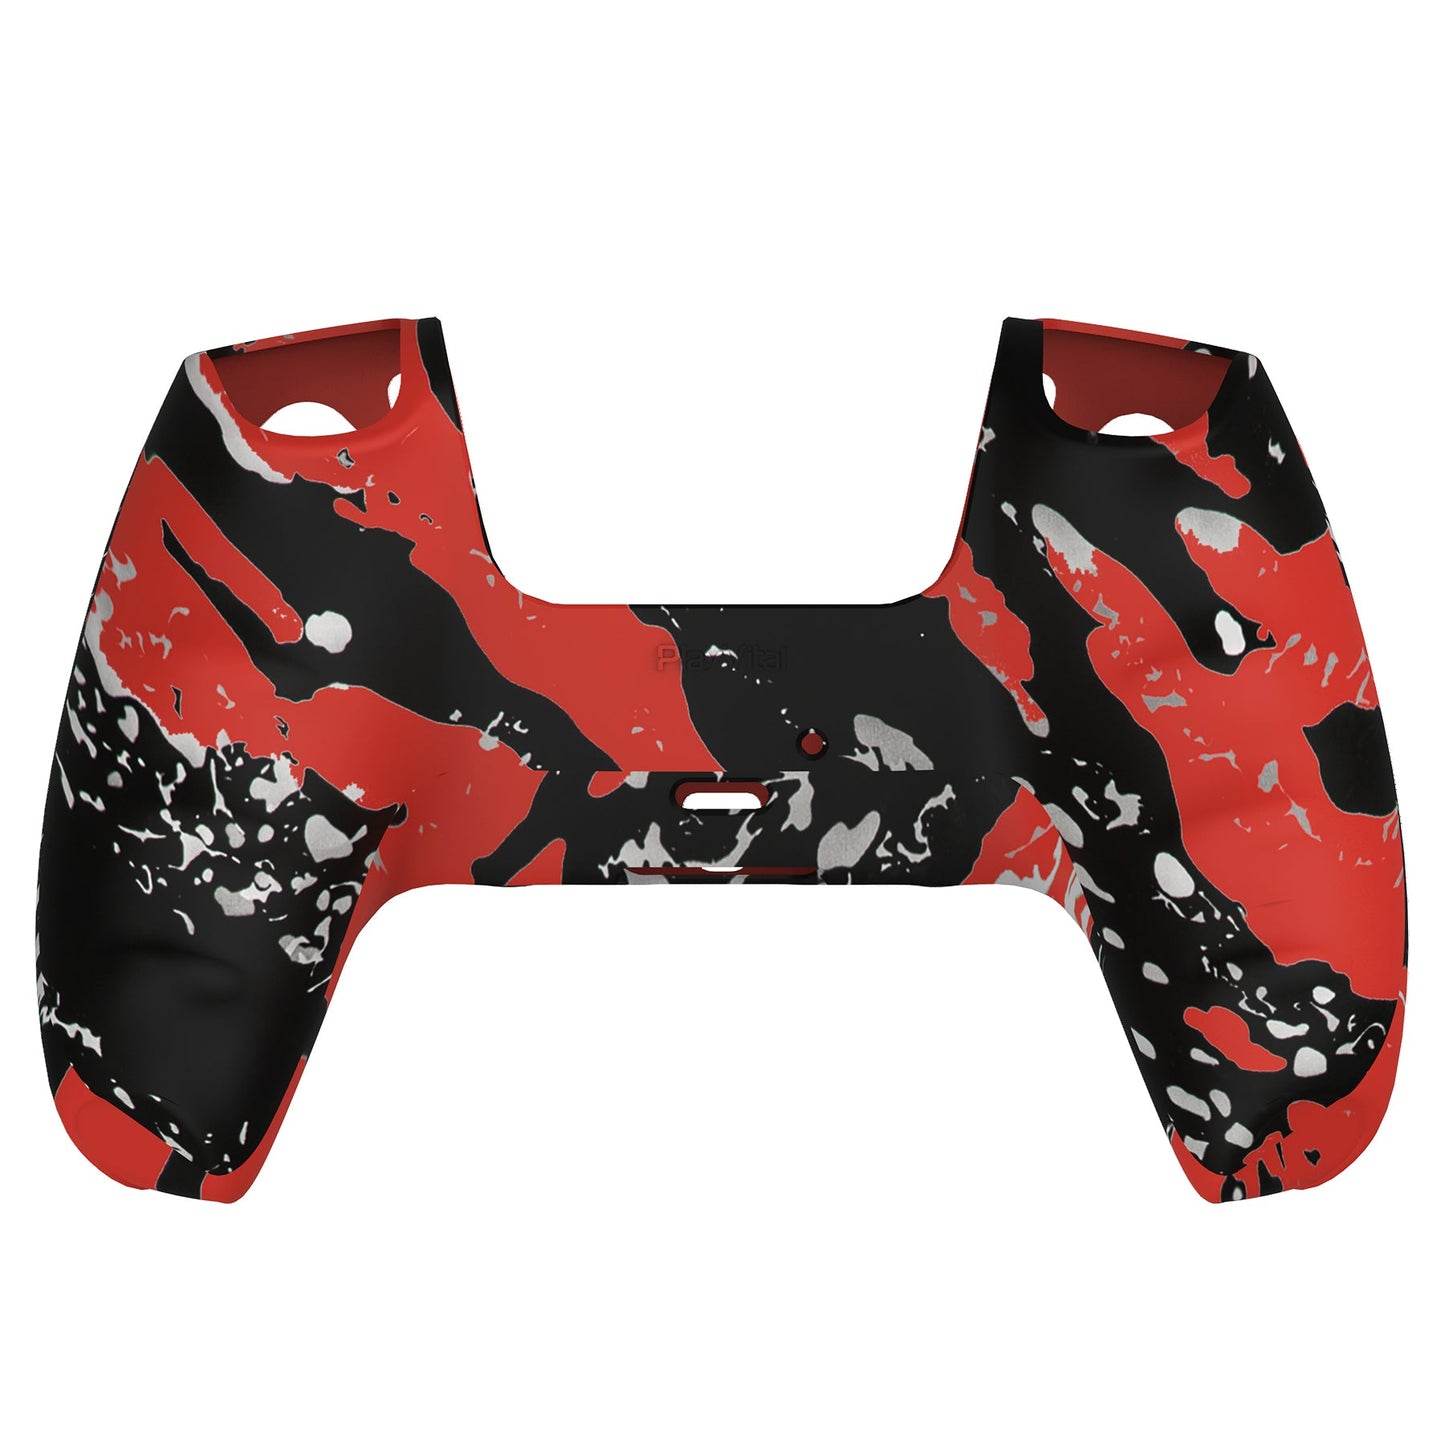 PlayVital Water Transfer Printing Red Splash Patterned Anti-Slip Silicone Cover Skin Soft Rubber Case Protector for PS5 Controller with 6 Thumb Grip Caps - KOPF021 PlayVital